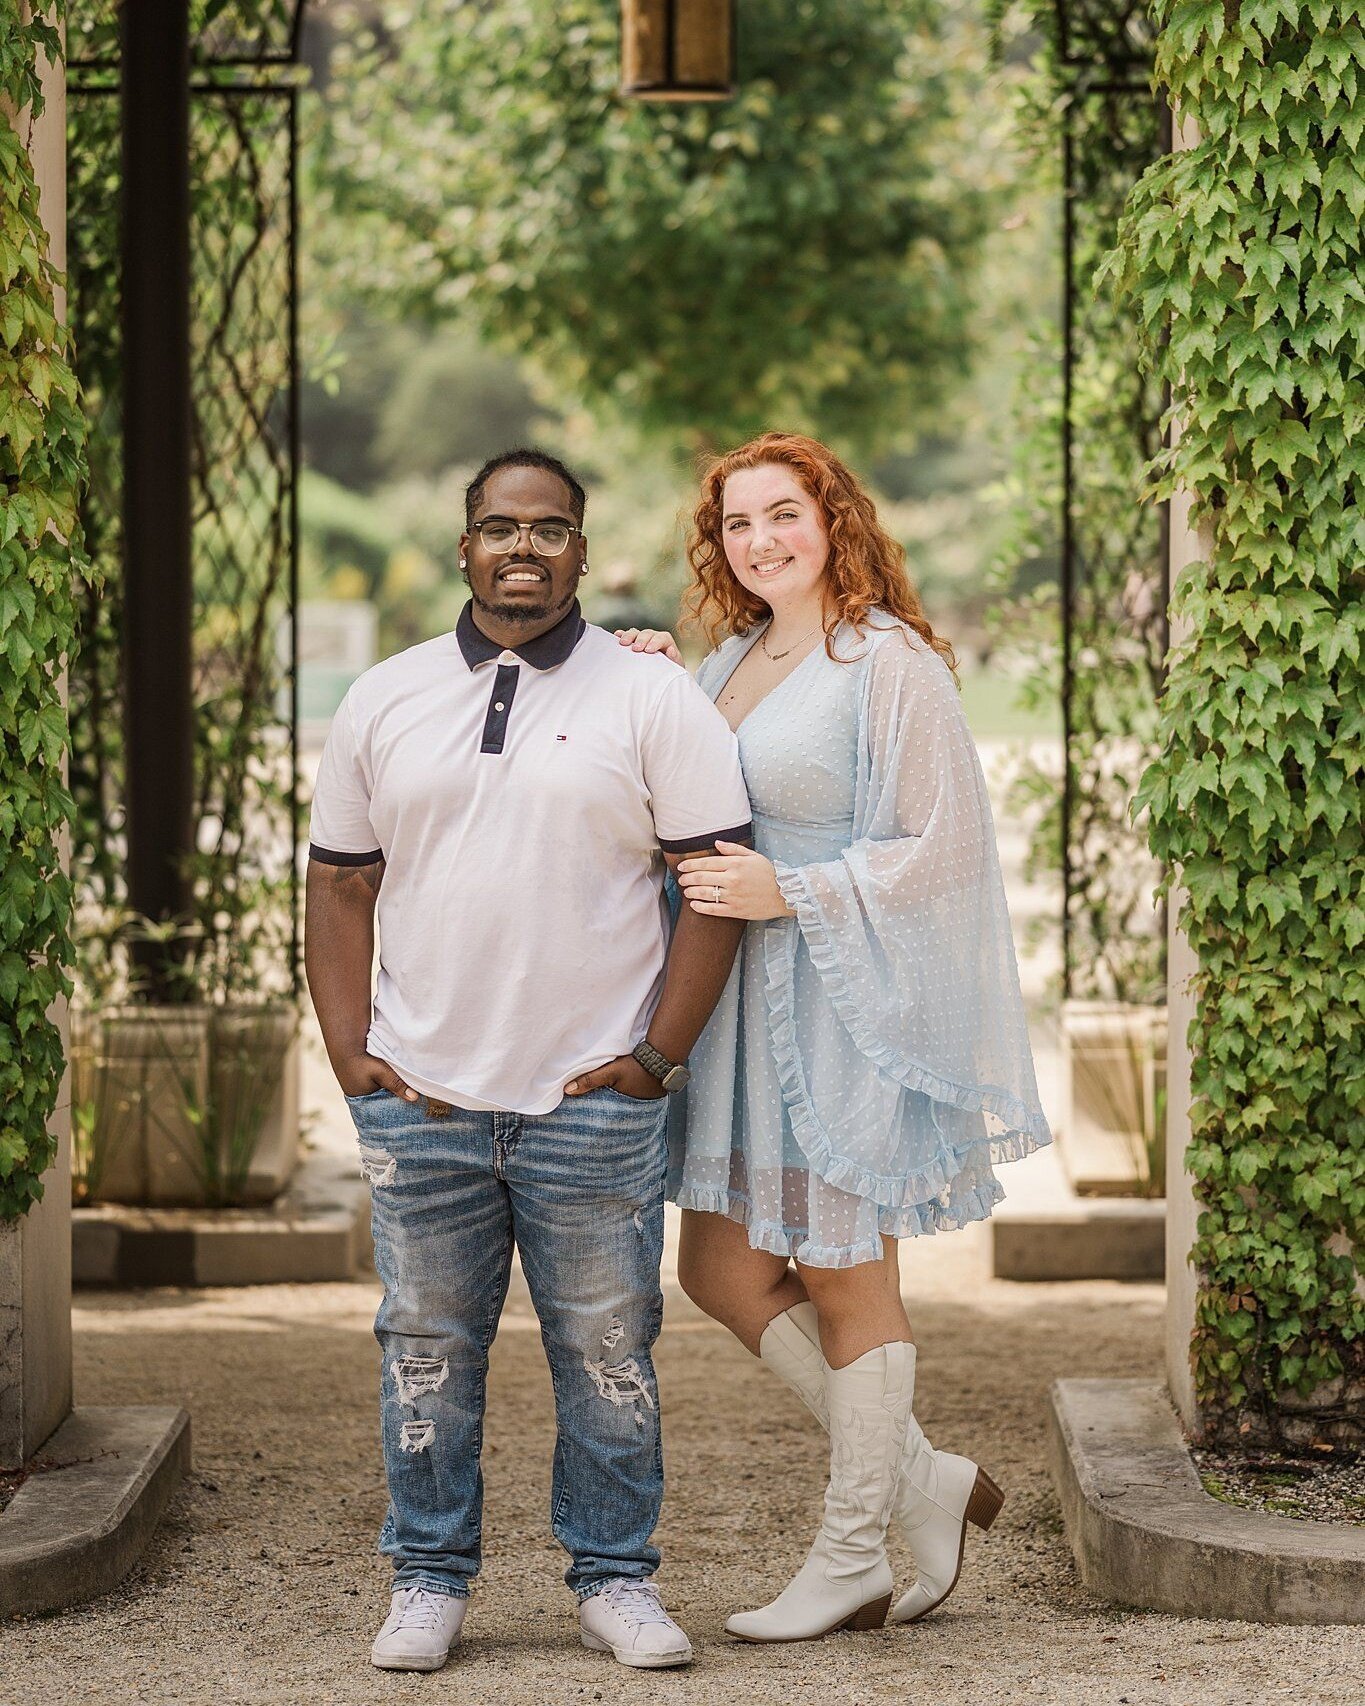 Alexis and Ray flew in from Las Vegas for the holiday weekend and were were able to start our day today in the amazing gardens at Longwood.  We had the gardens to ourselves and had a magical time together!  I can't wait for this Barn at Stoneybrooke 